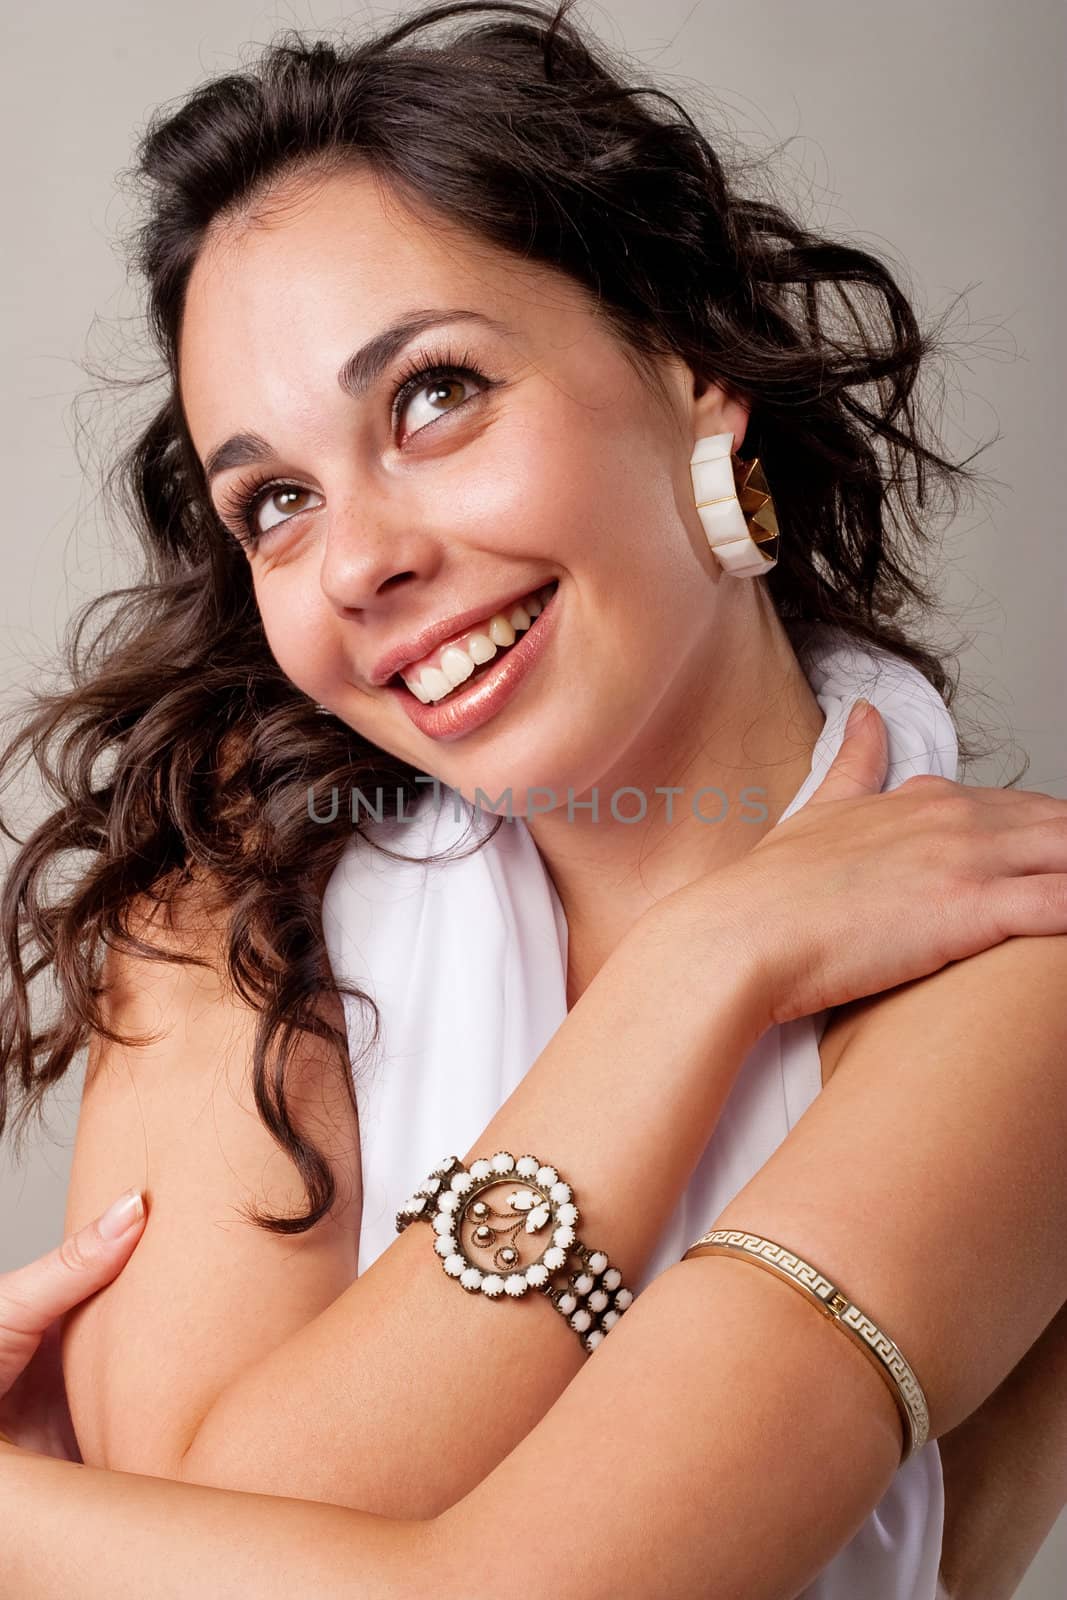 Cute young lady embracing her shoulders and laughing